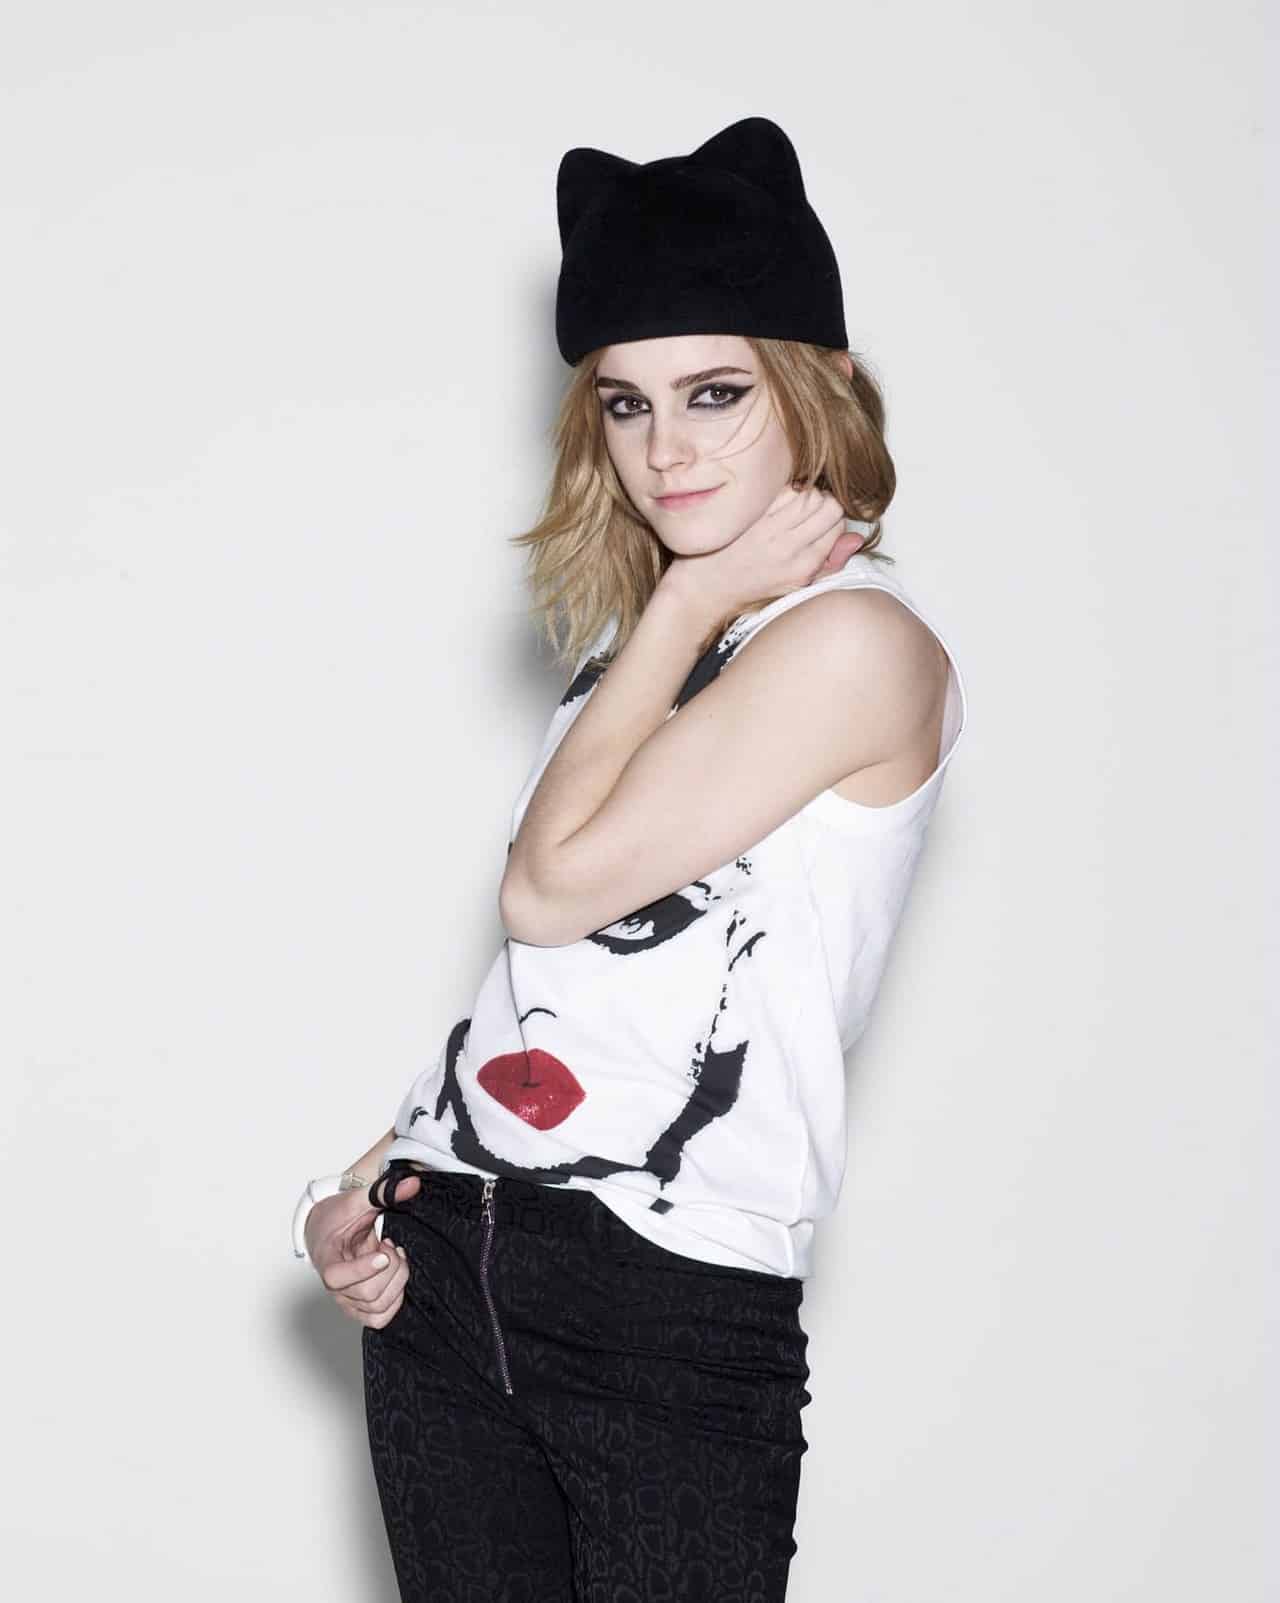 Emma Watson Posing in a Chic Outfit in an ELLE Magazine Photoshoot